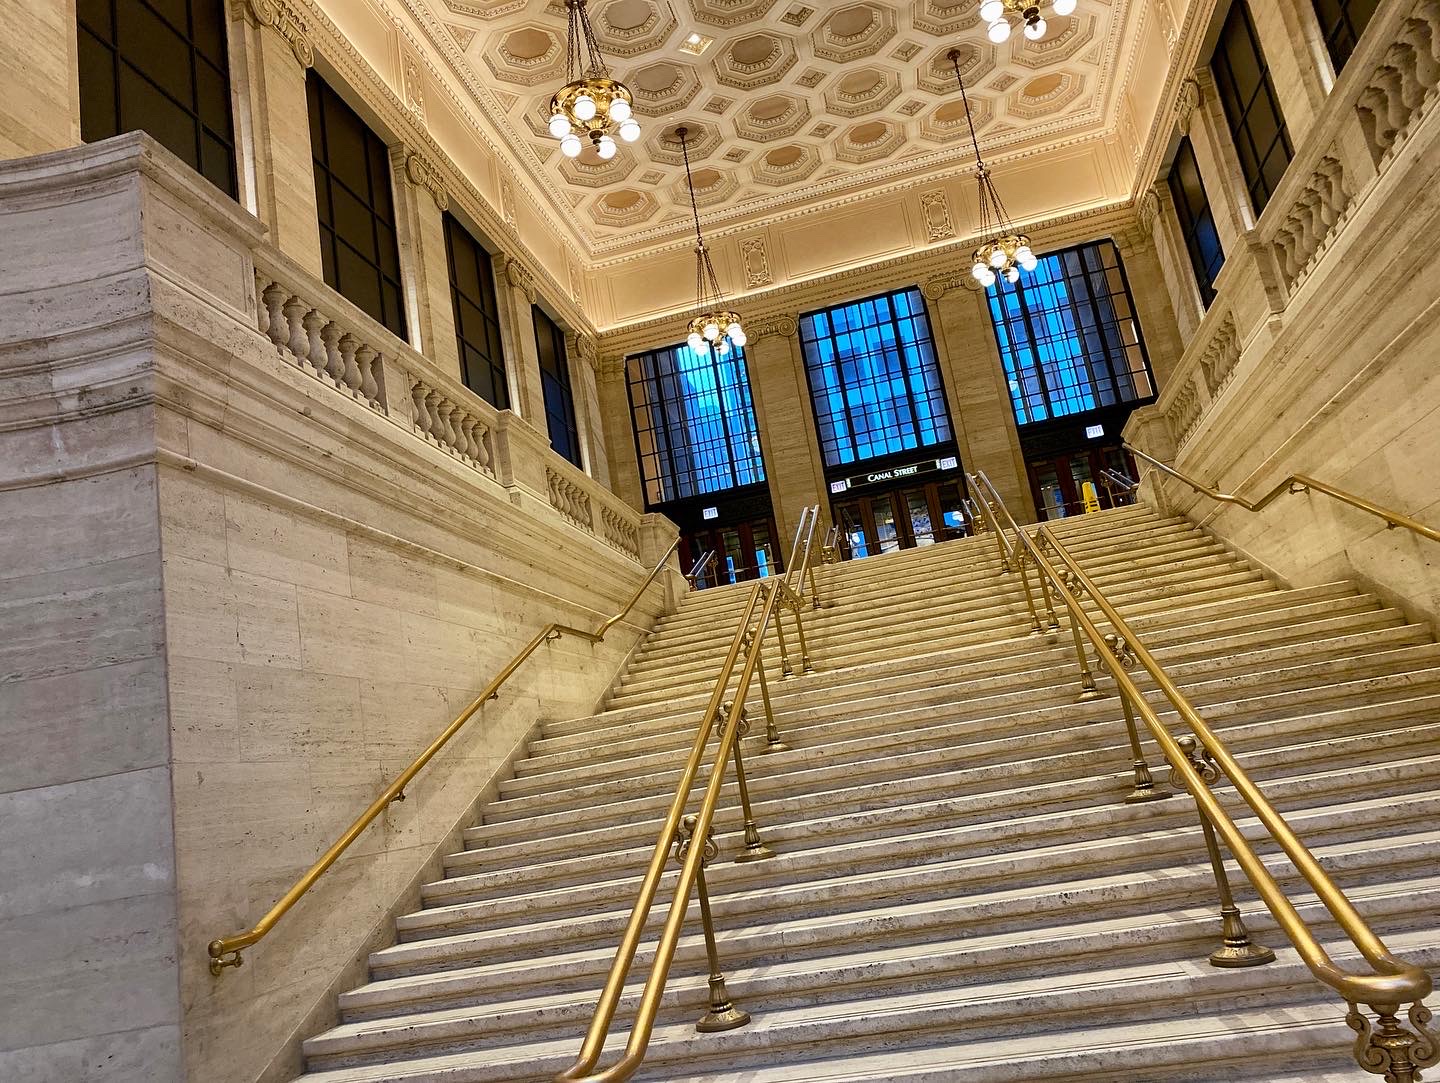 Angled view of stairs in Union Station leading up to the street, lined with brass railings